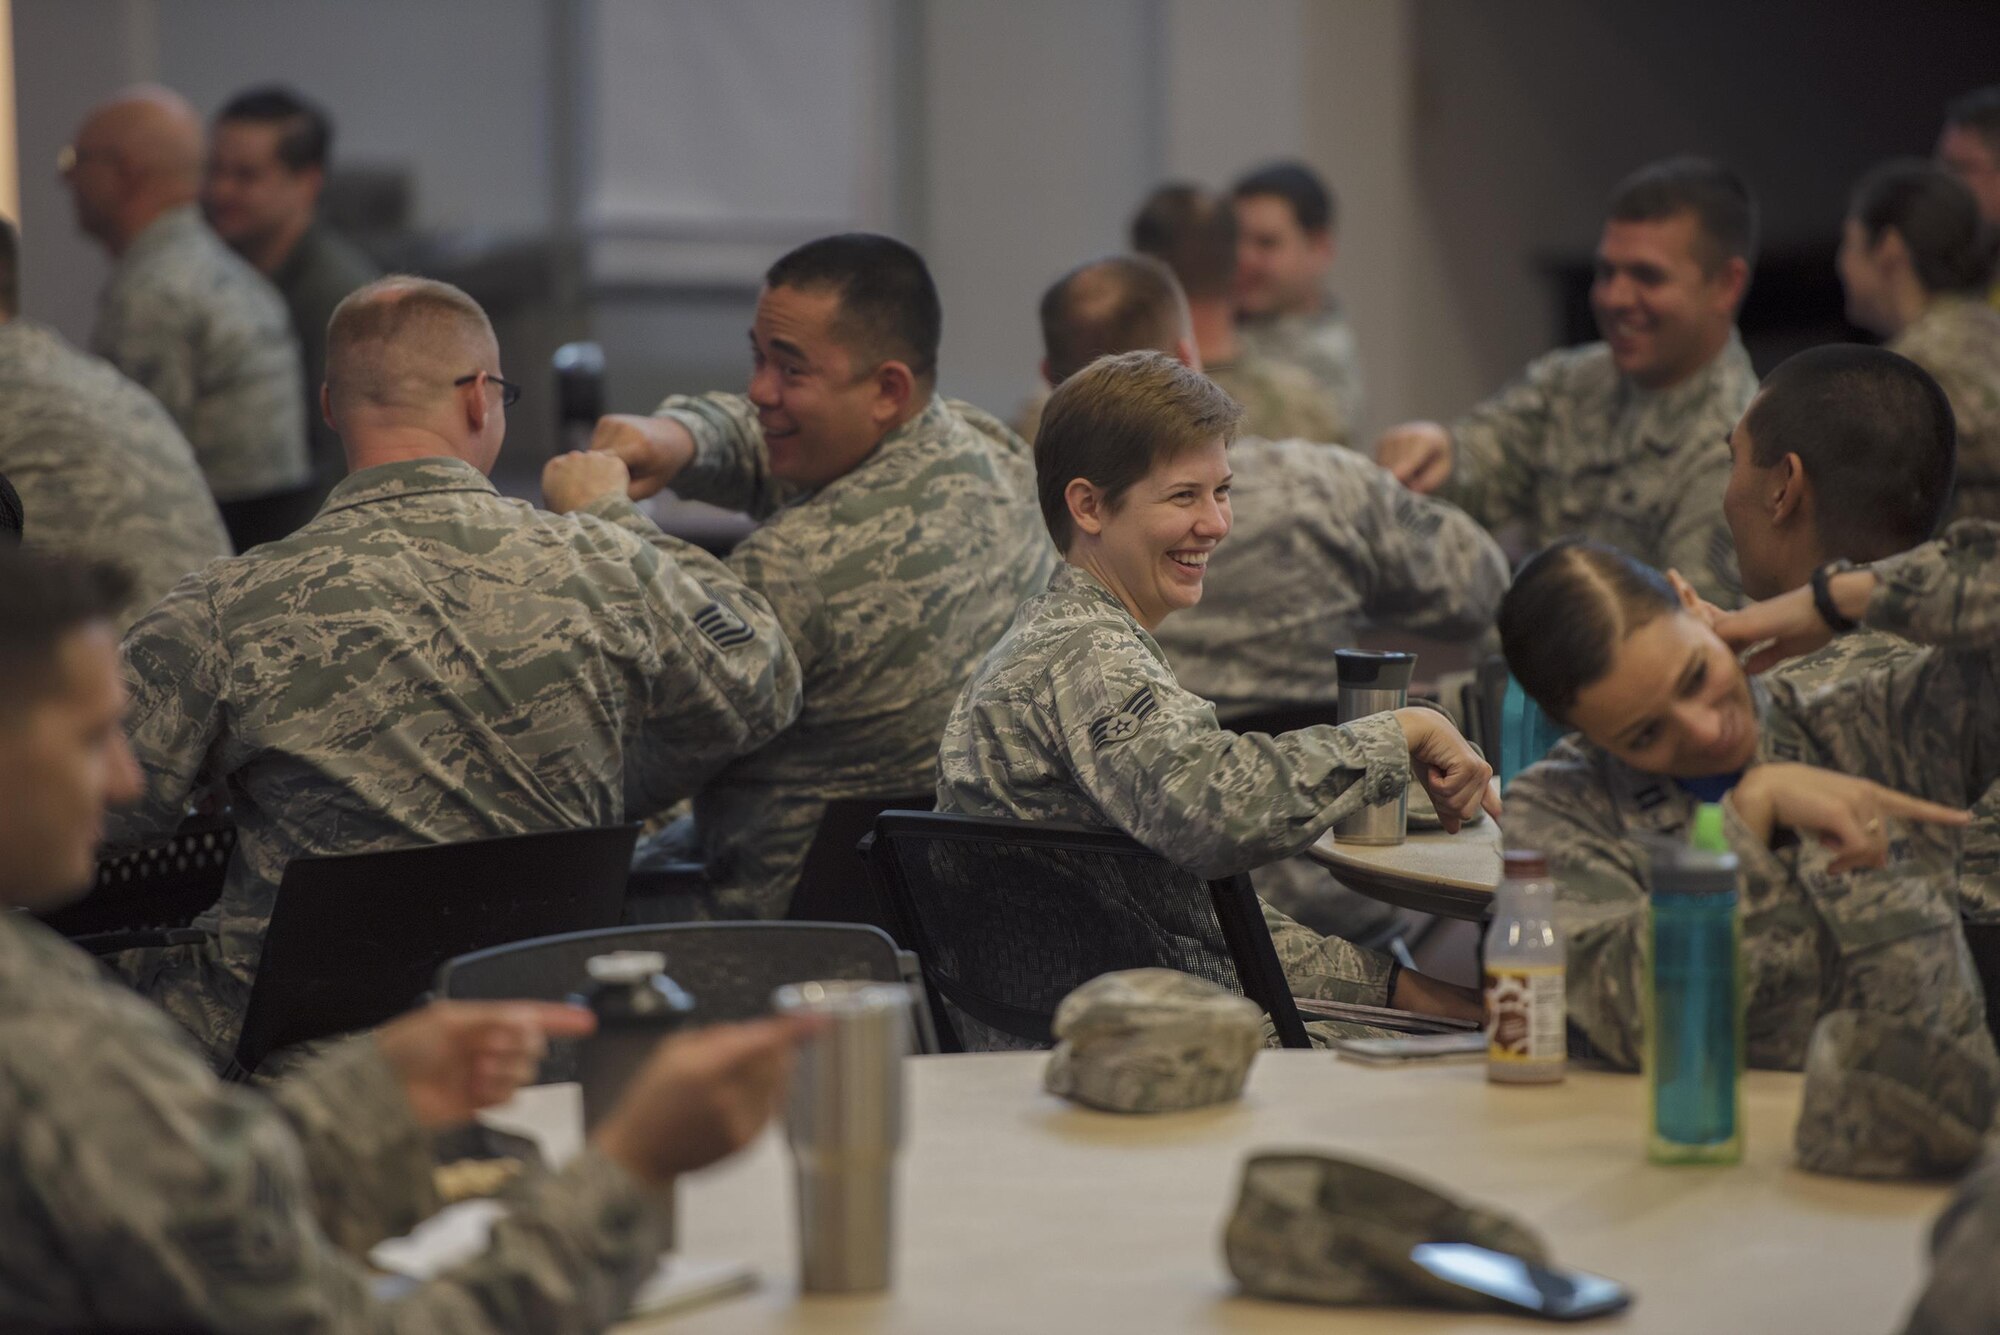 Team Moody members share a laugh during a group activity as part of a visit from  Joint Base San Antonio-Randolph, Texas’s, Profession of Arms Center of Excellence, May 19, 2017, at Moody Air Force Base, Ga. PACE encourages Airmen to commit to the mindset, character and core values required to succeed today and well into the future. During the visit, Smith challenged Moody Airmen to successfully change their perspectives to find solutions to old problems as leaders. (U.S. Air Force photo by Senior Airman Greg Nash)